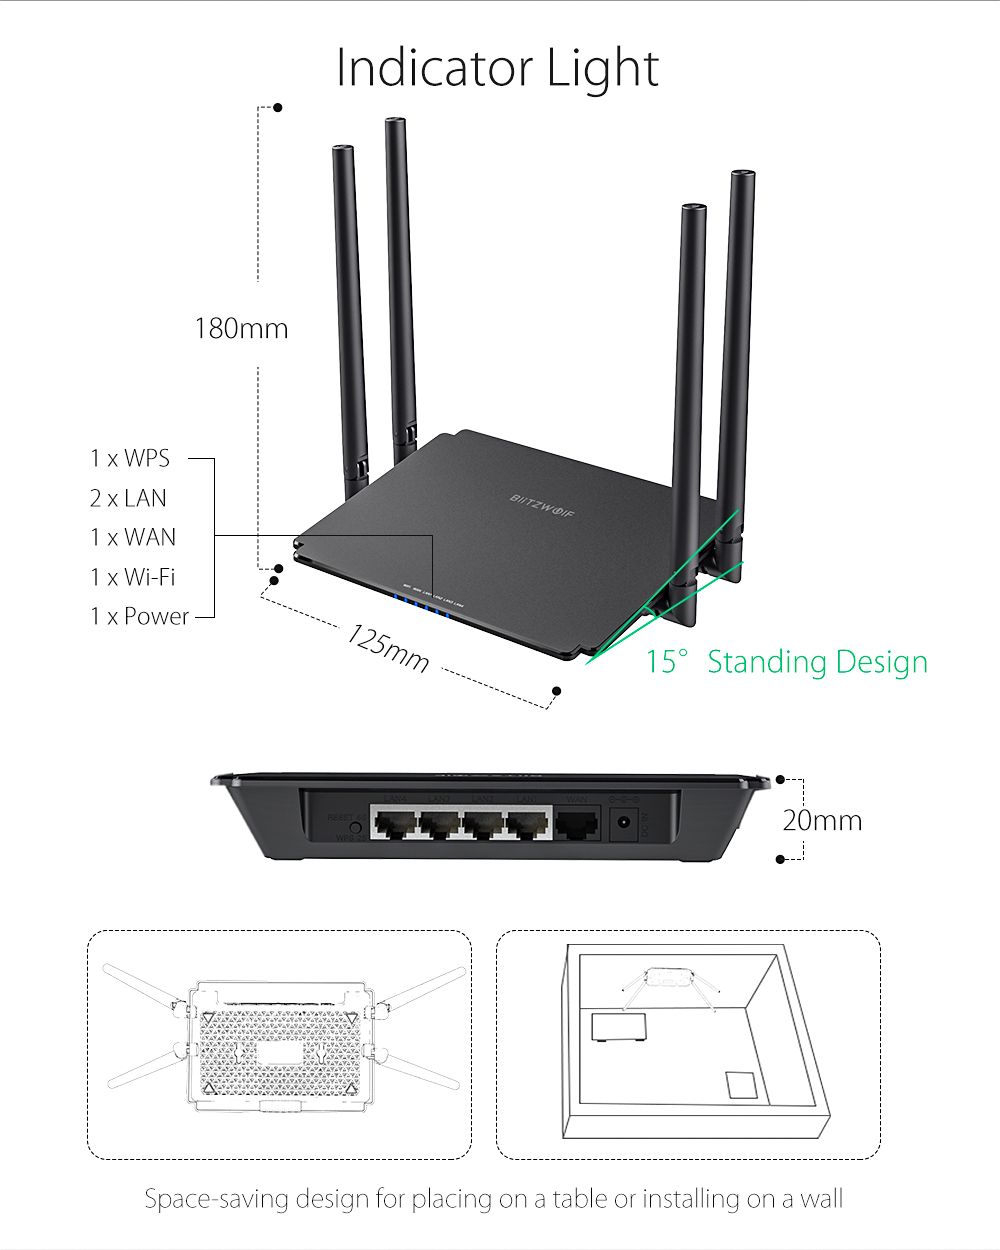 BlitzWolfreg-BW-NET1-Dual-Band-Wireless-Router-1200Mbps-512MB-Superior-Chip-Wireless-WiFi-Signal-Boo-1701641